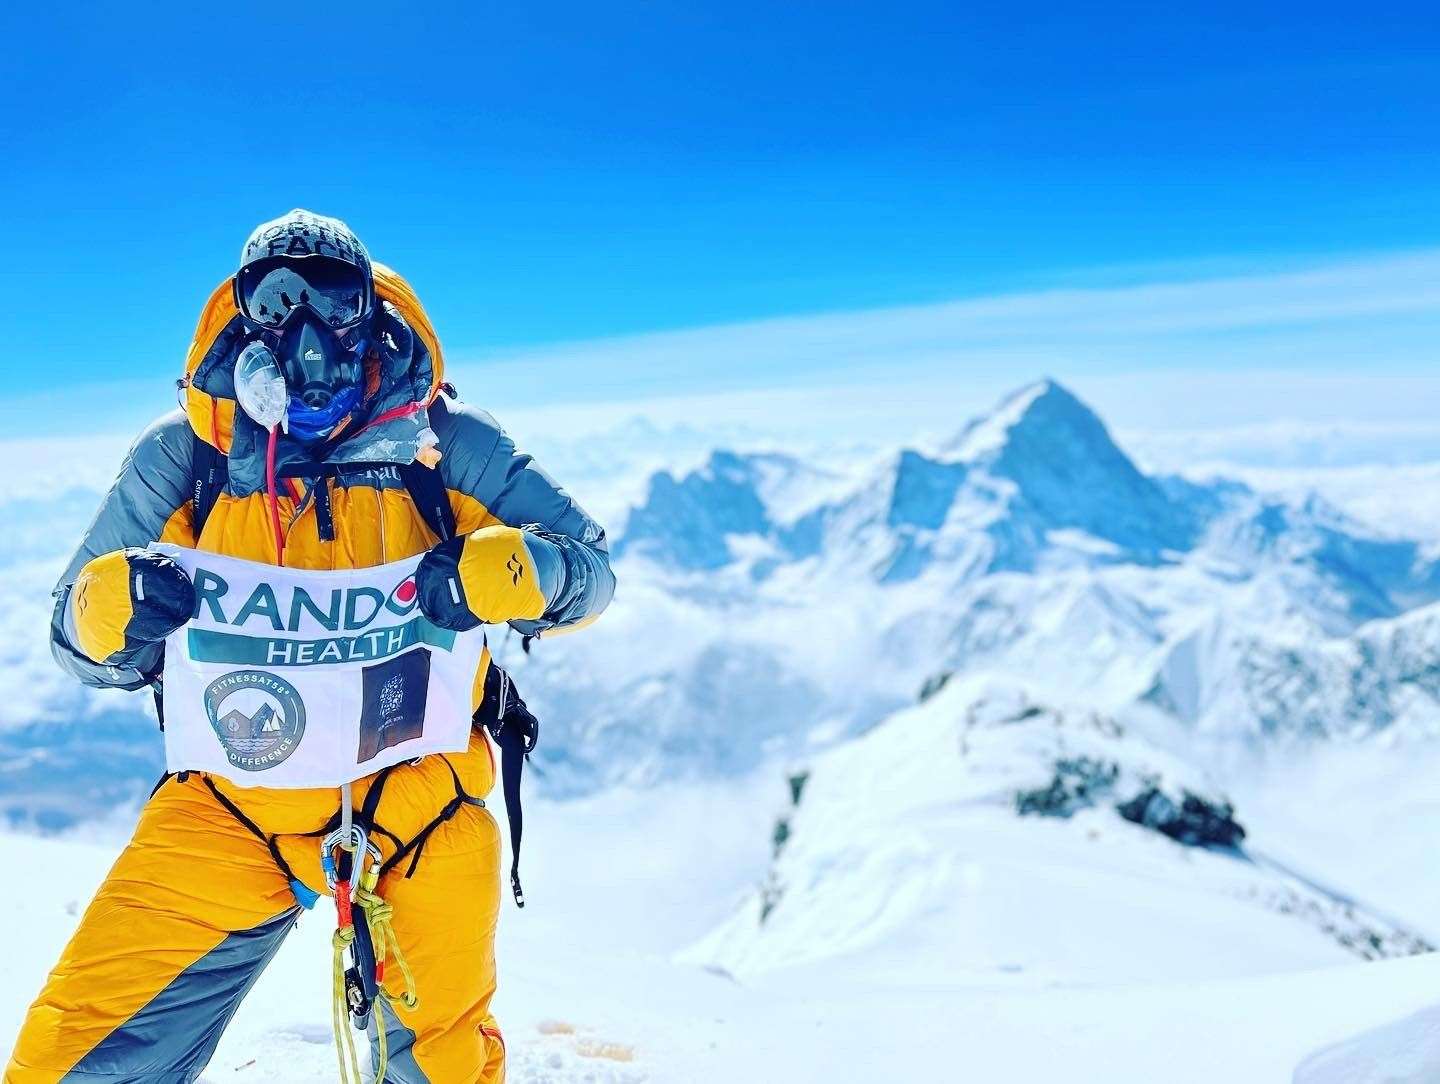 Sam Cairns will talk avout the challenges of his Everest experience.